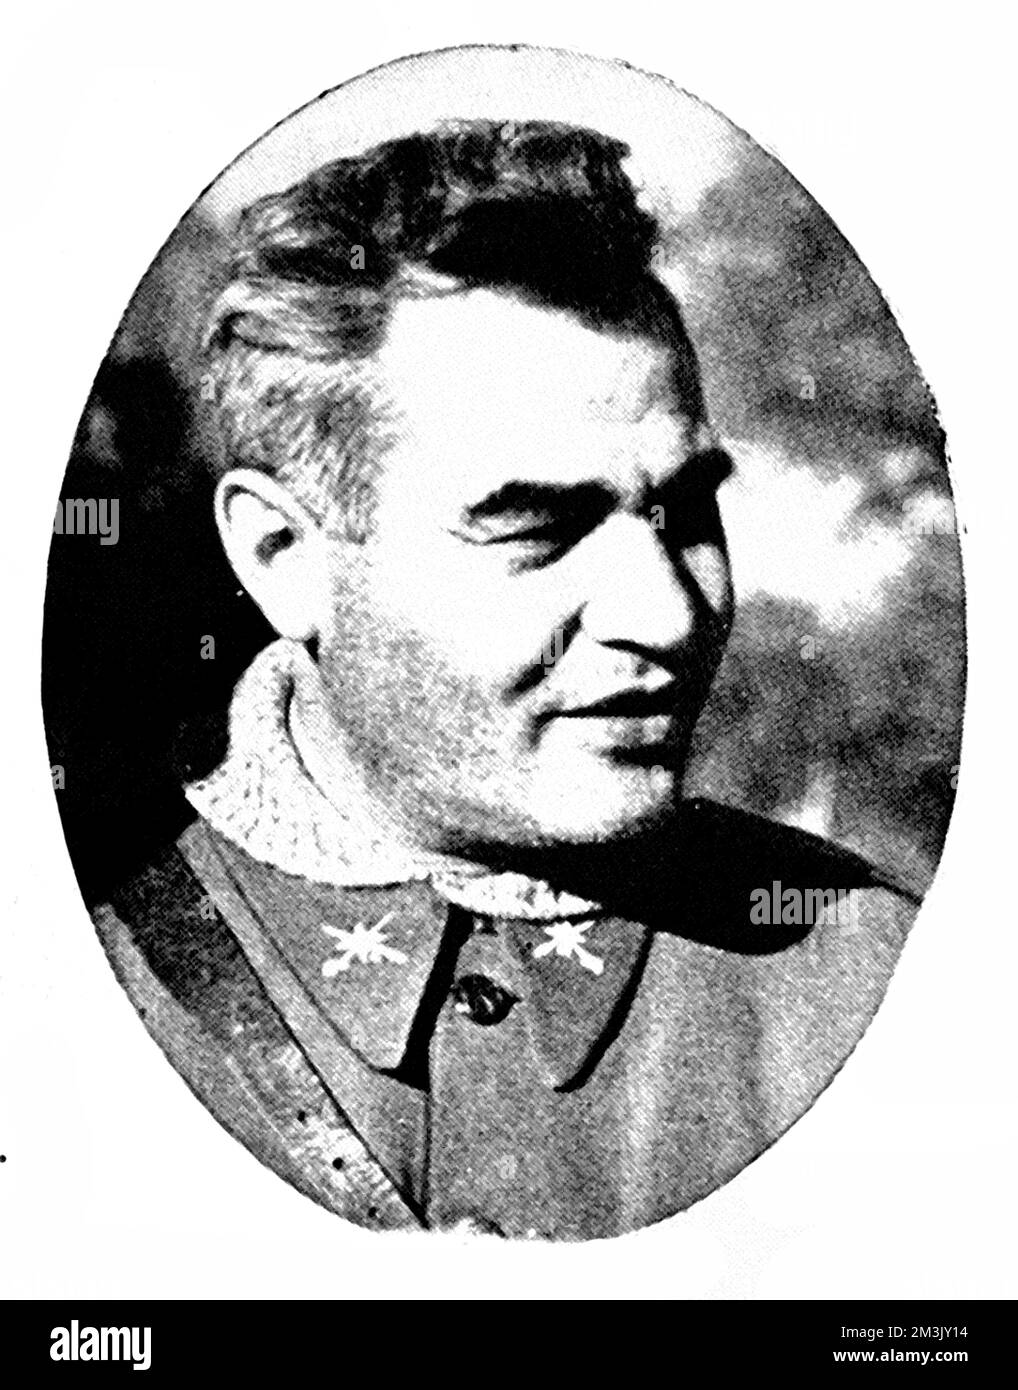 Photographic portrait of General Emilio Kleber, Commander of the 11 International Brigade during the Spanish Civil War, pictured near Madrid in 1937.      The International Brigade was made up of volunteers from all over Europe and North America, who went to Spain to fight for the Republican Government.     Date: 1937 Stock Photo